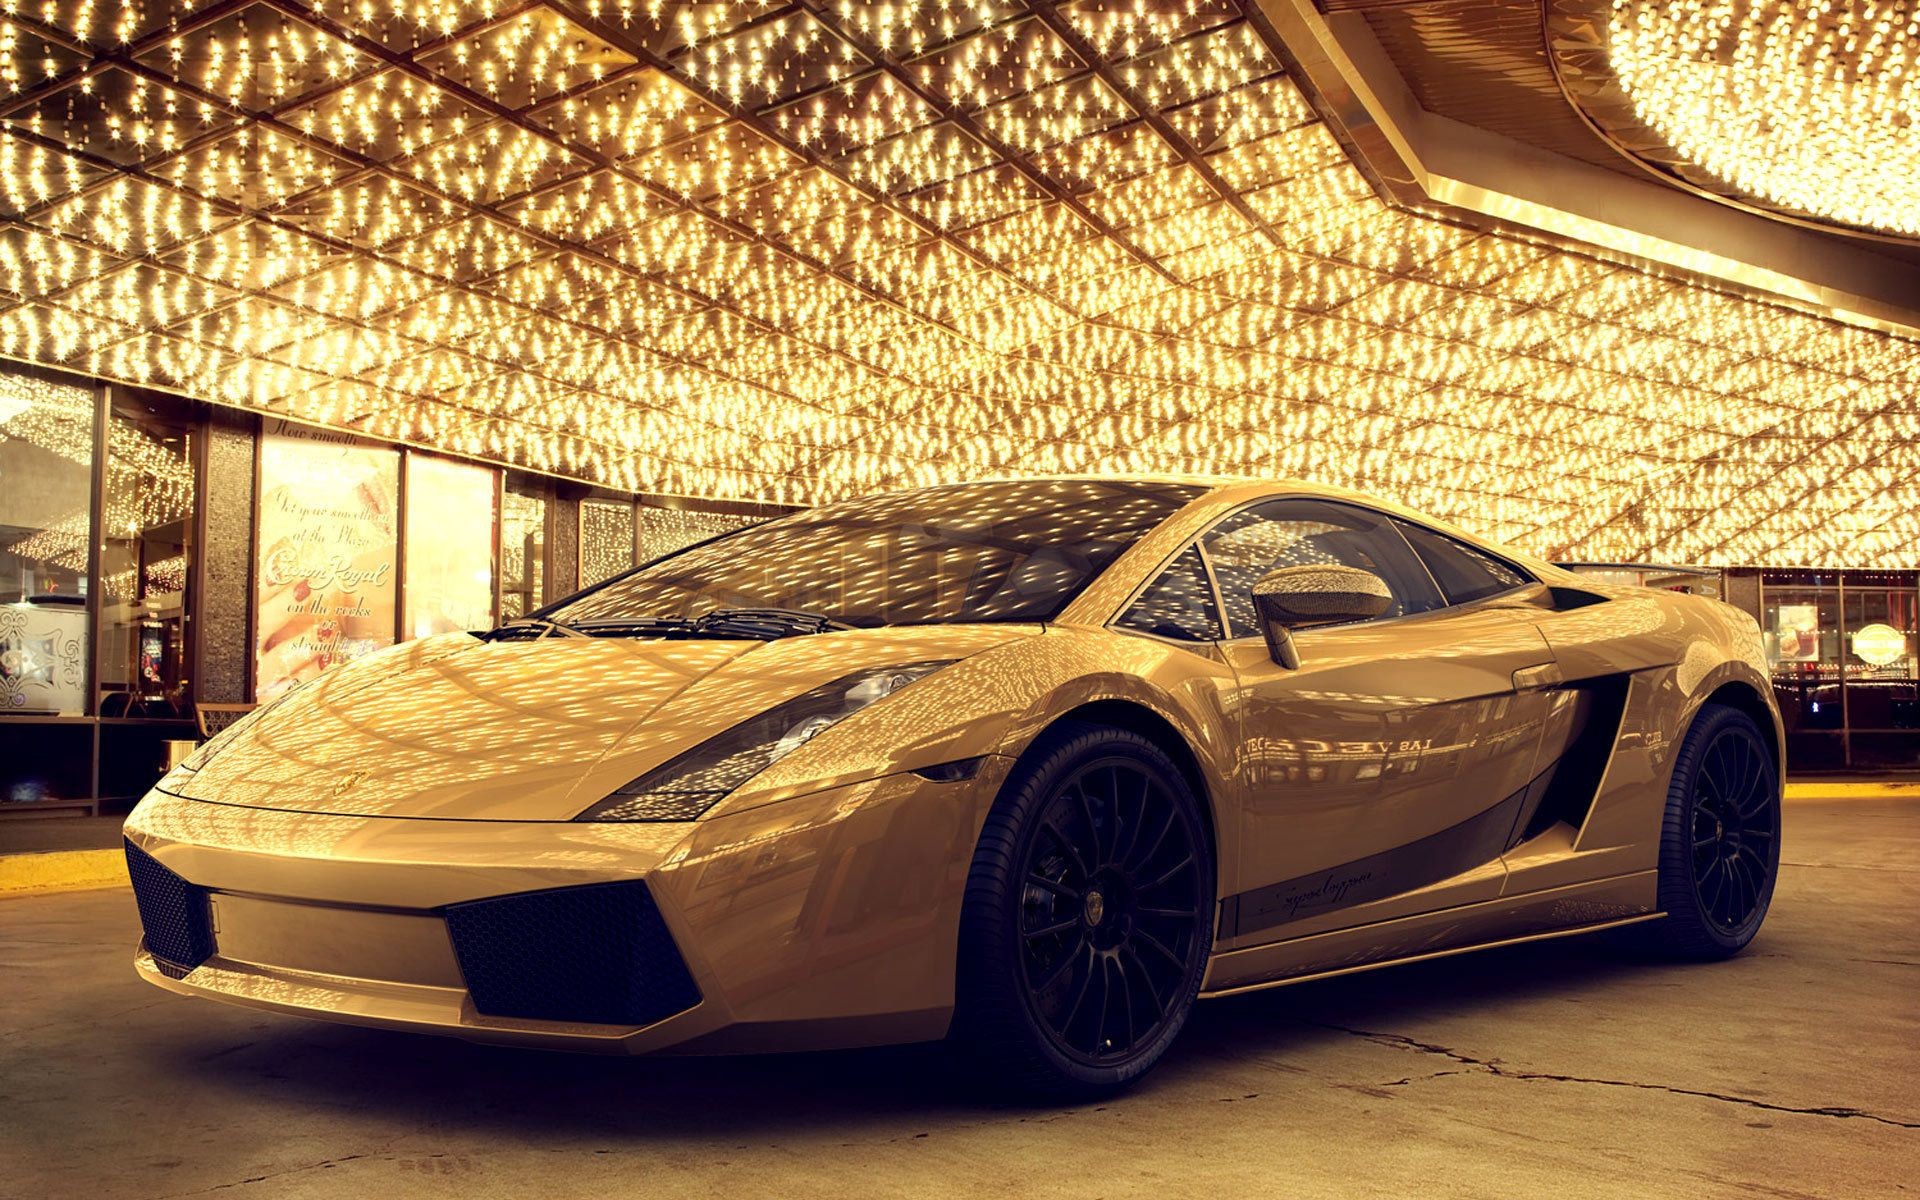 Beautiful HD Wallpapers very attractive.Top HD Wallpapers very wonderful. Gold Plated Lamborghini Aventador